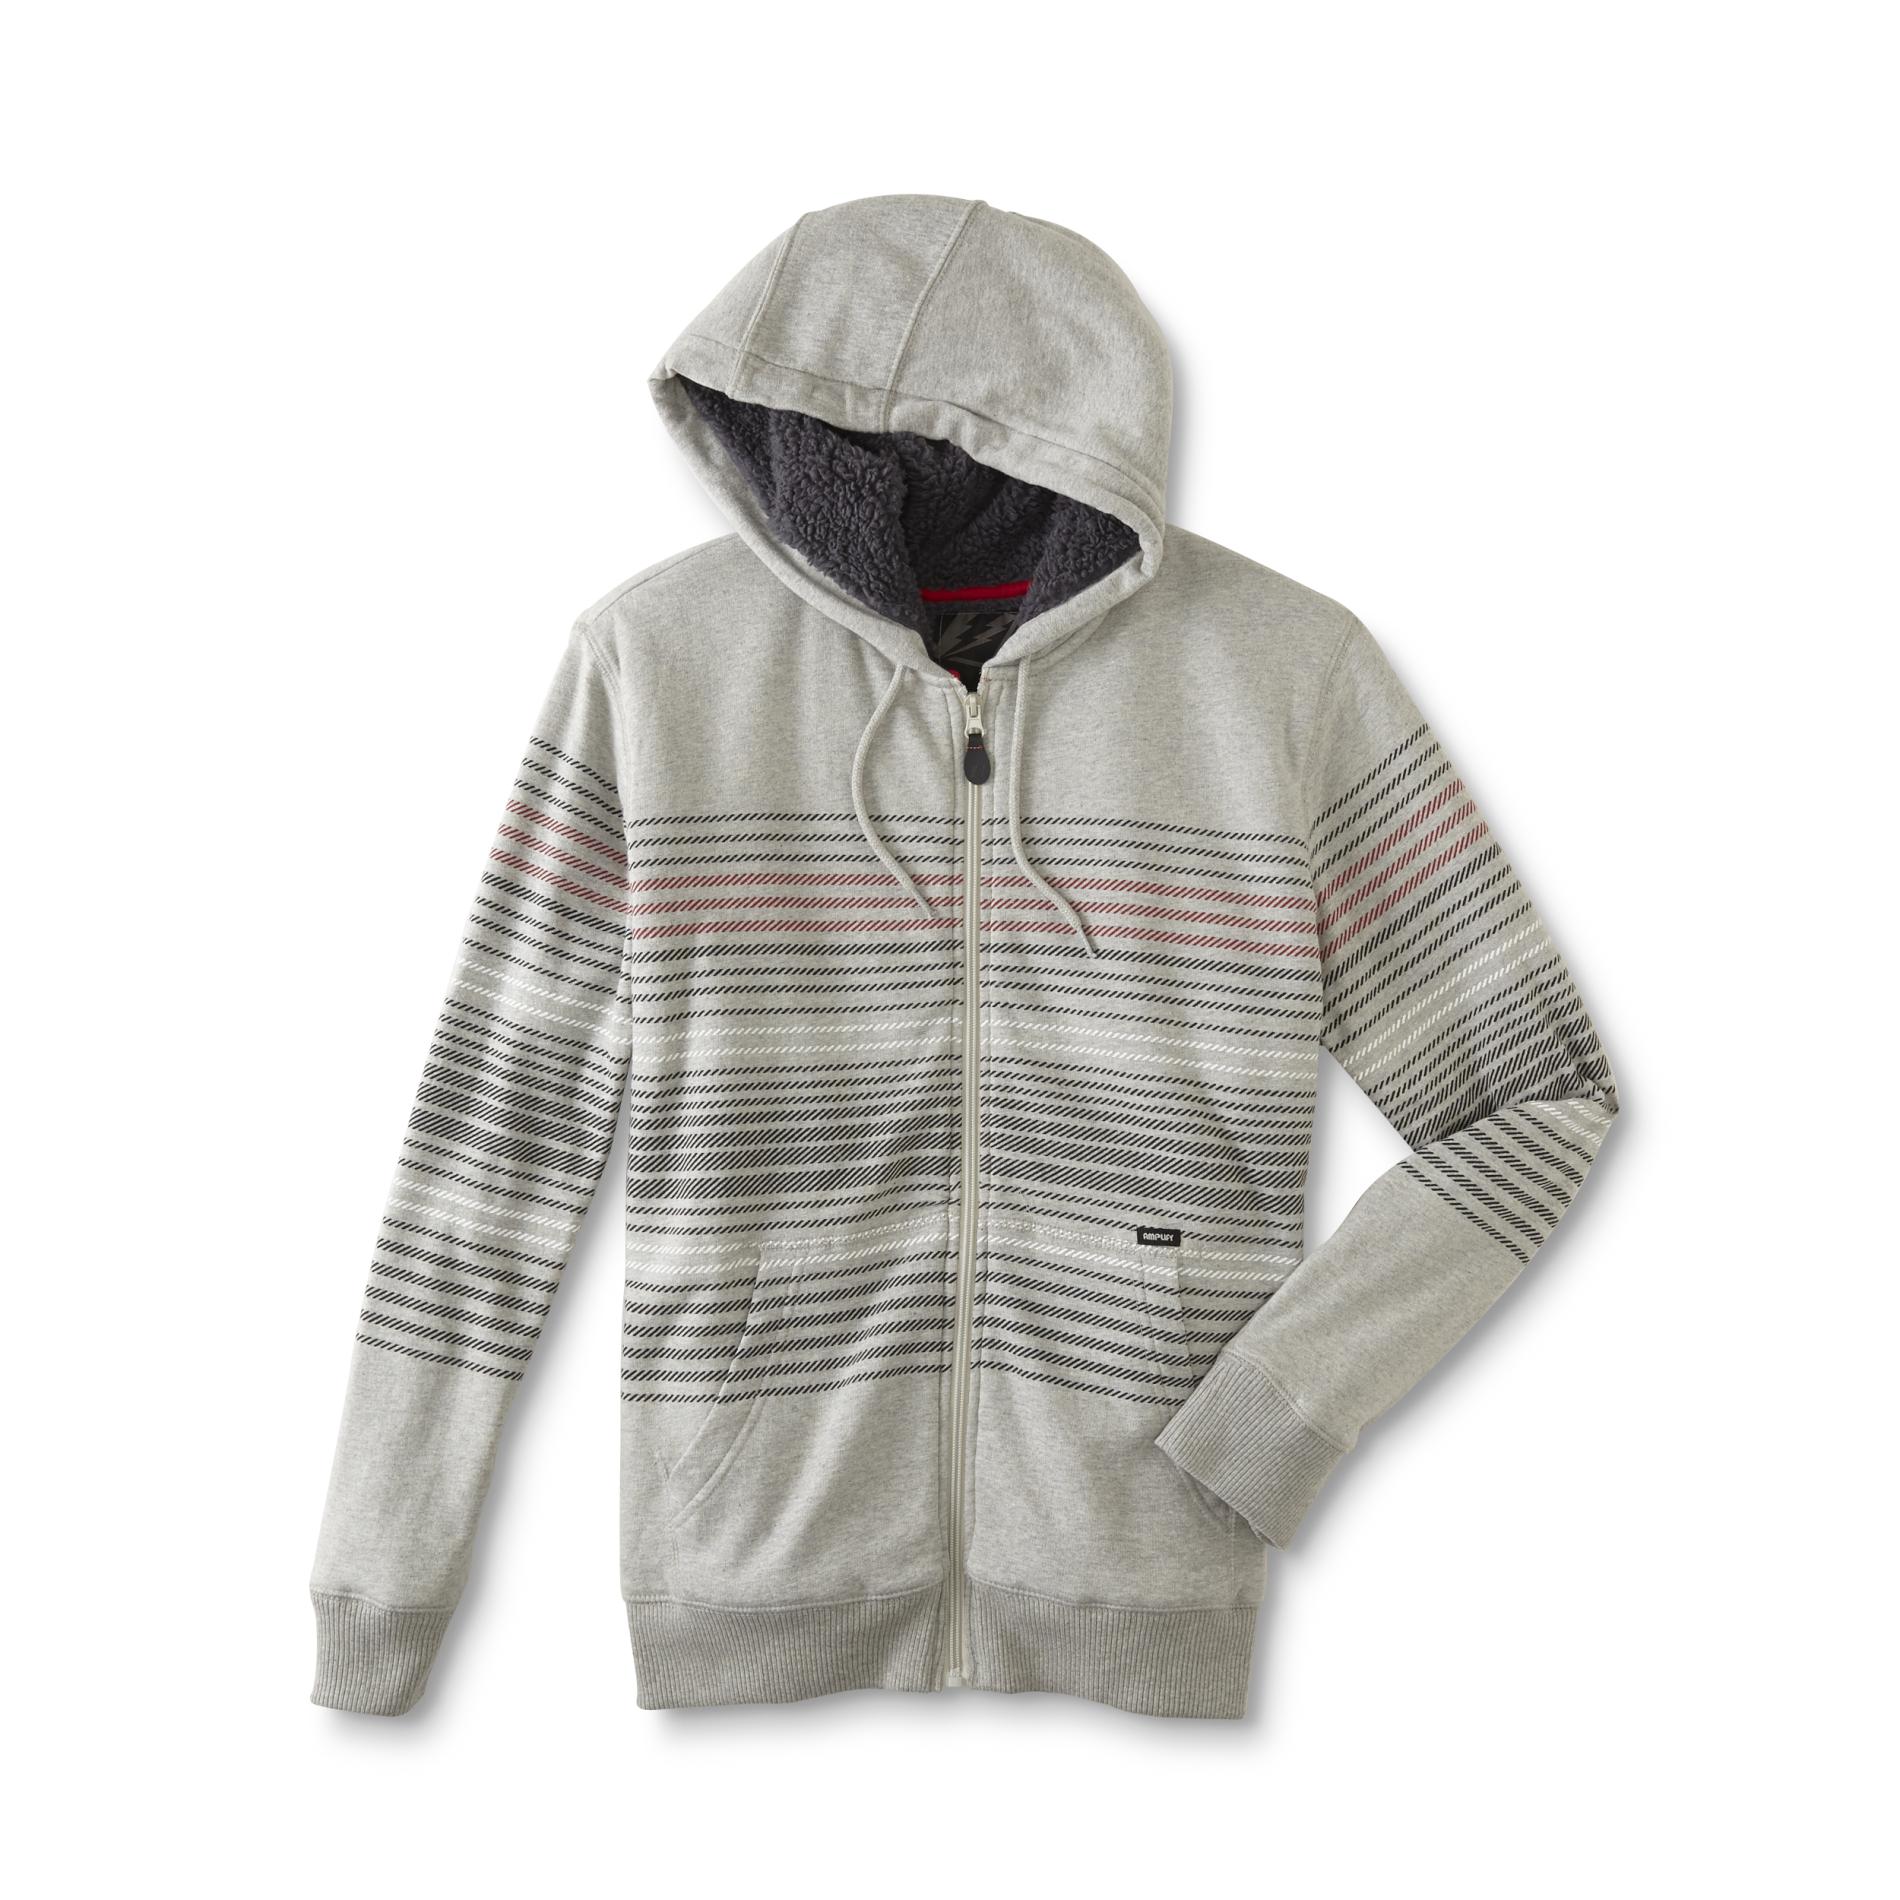 Amplify Young Men's Hoodie Jacket - Striped